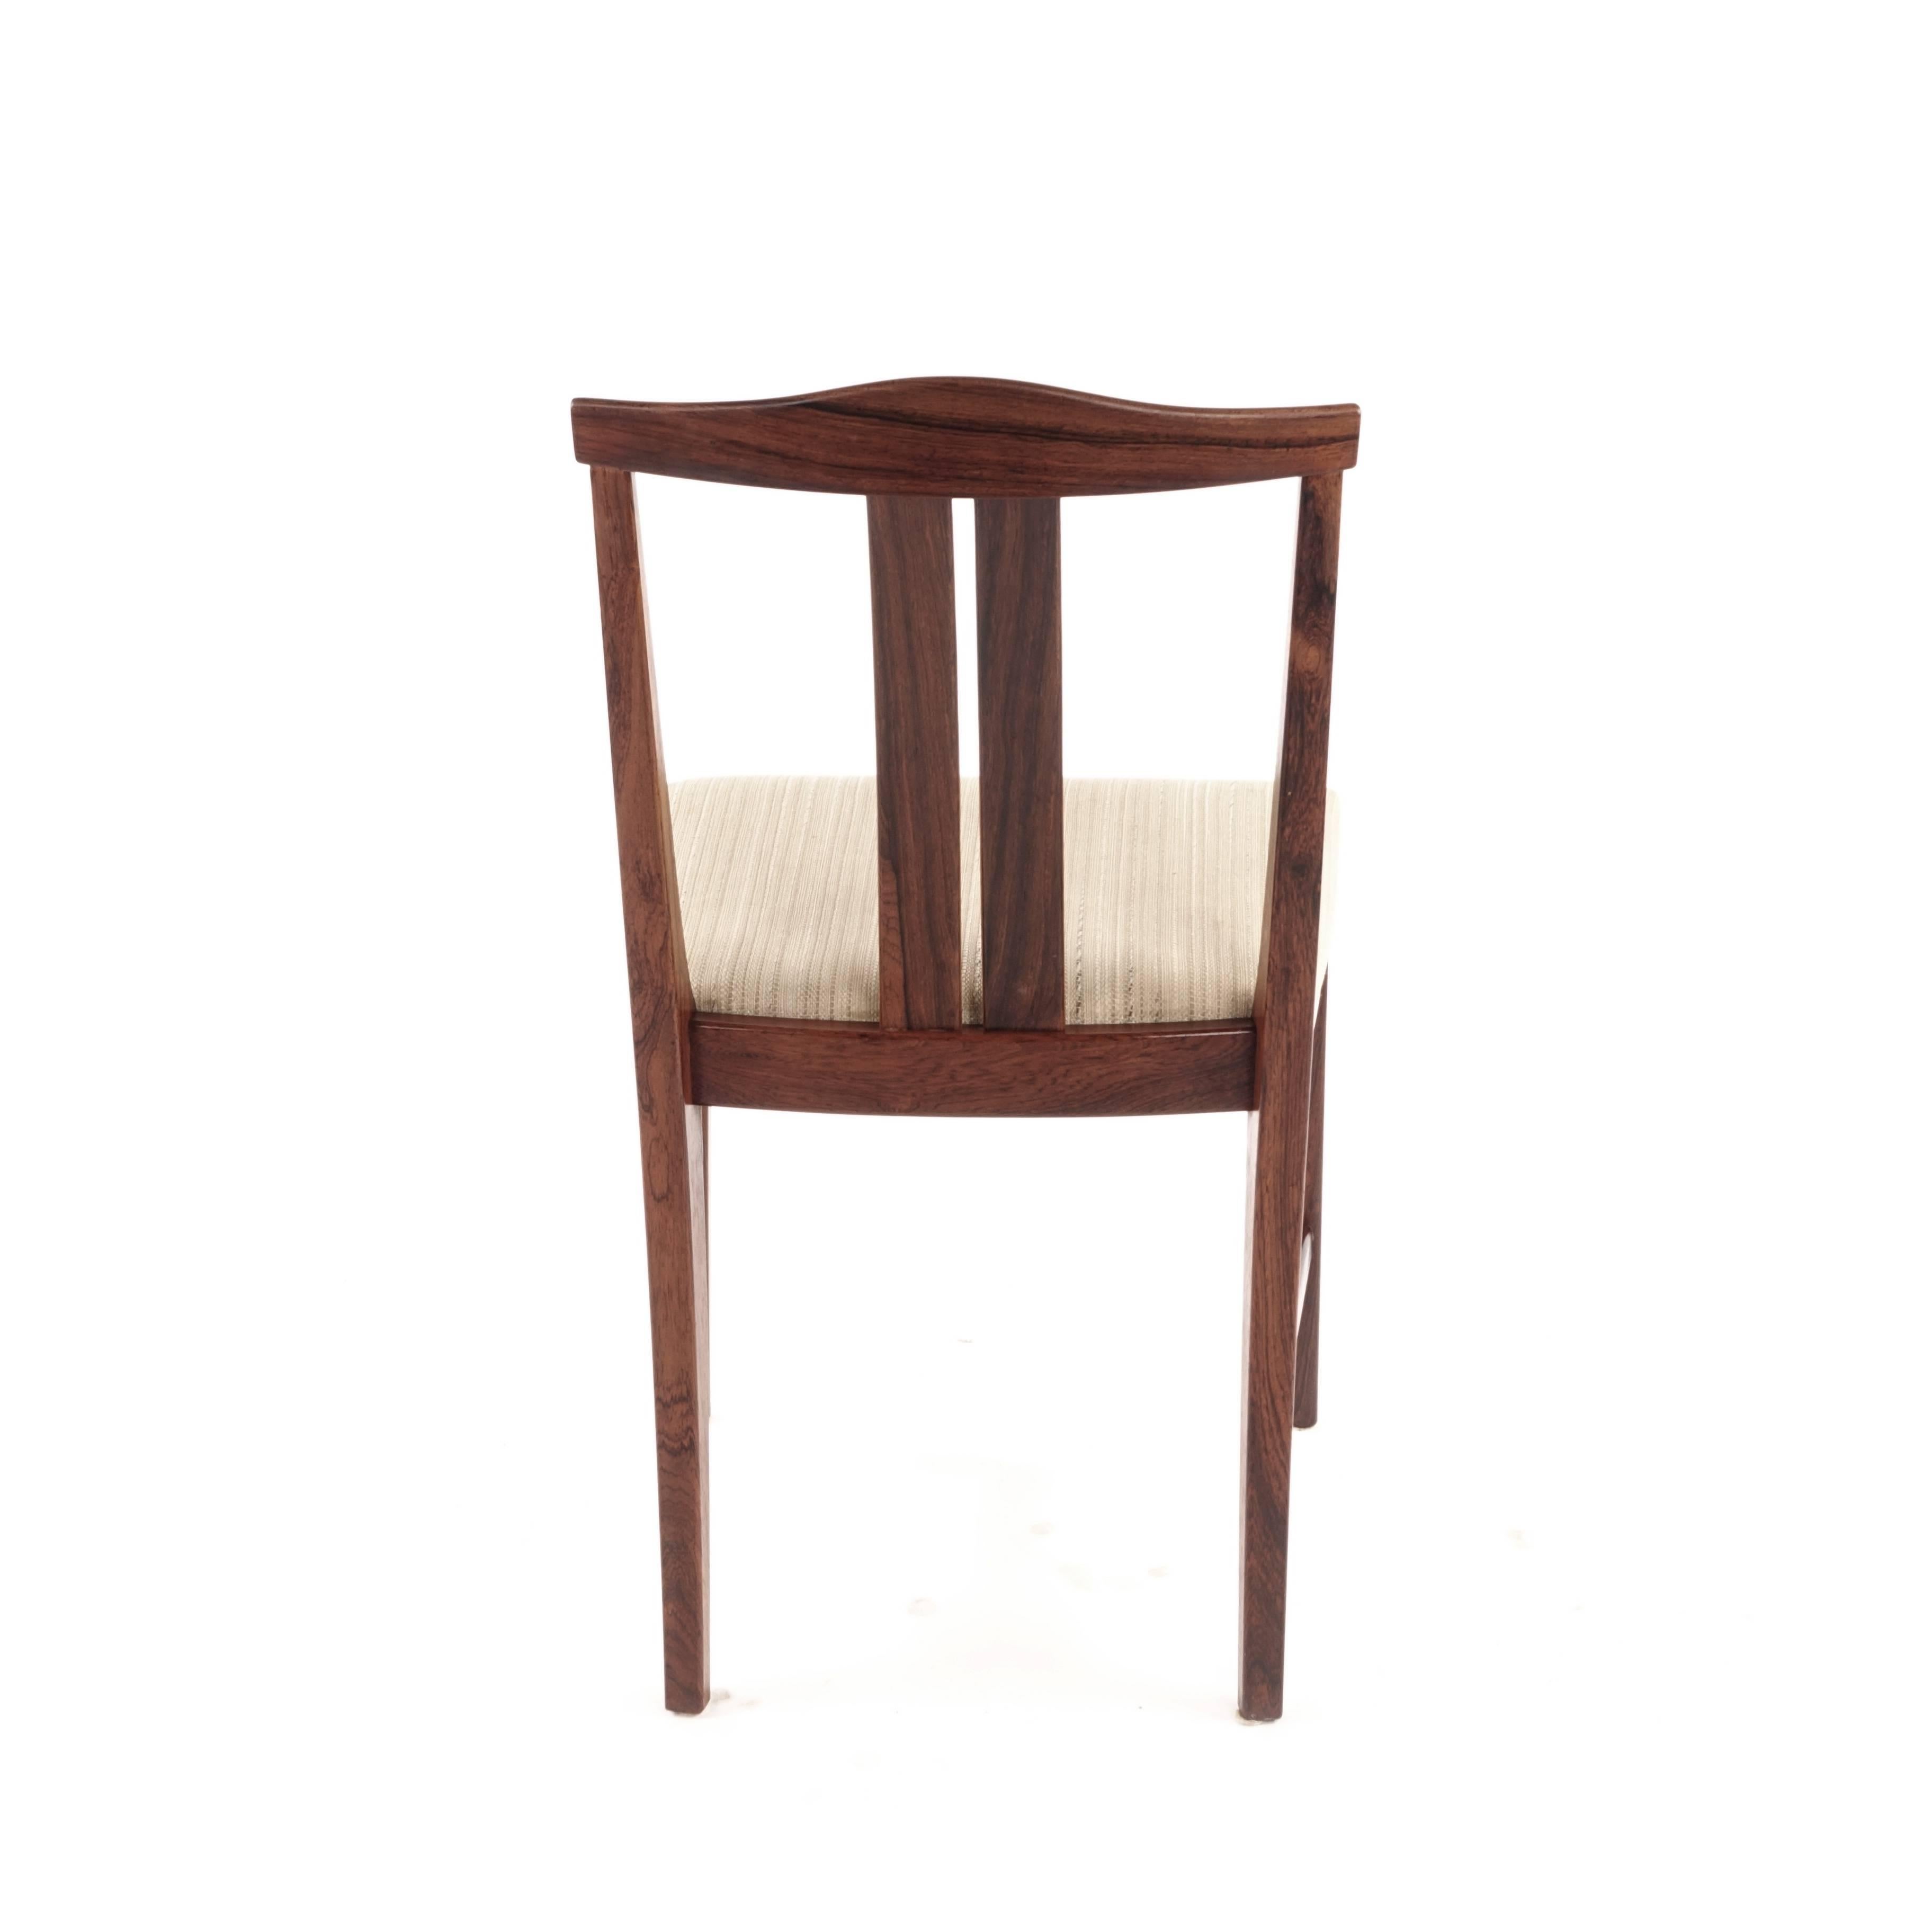 Four chairs, Sweden, 1960s-1970s, frame of rosewood, seats upholstered in bright cloth, attributed Bertil Fridhagen for Swedish furniture factory Bodafors.


There were many furniture manufacturers in Sweden in the past. One of the largest was the